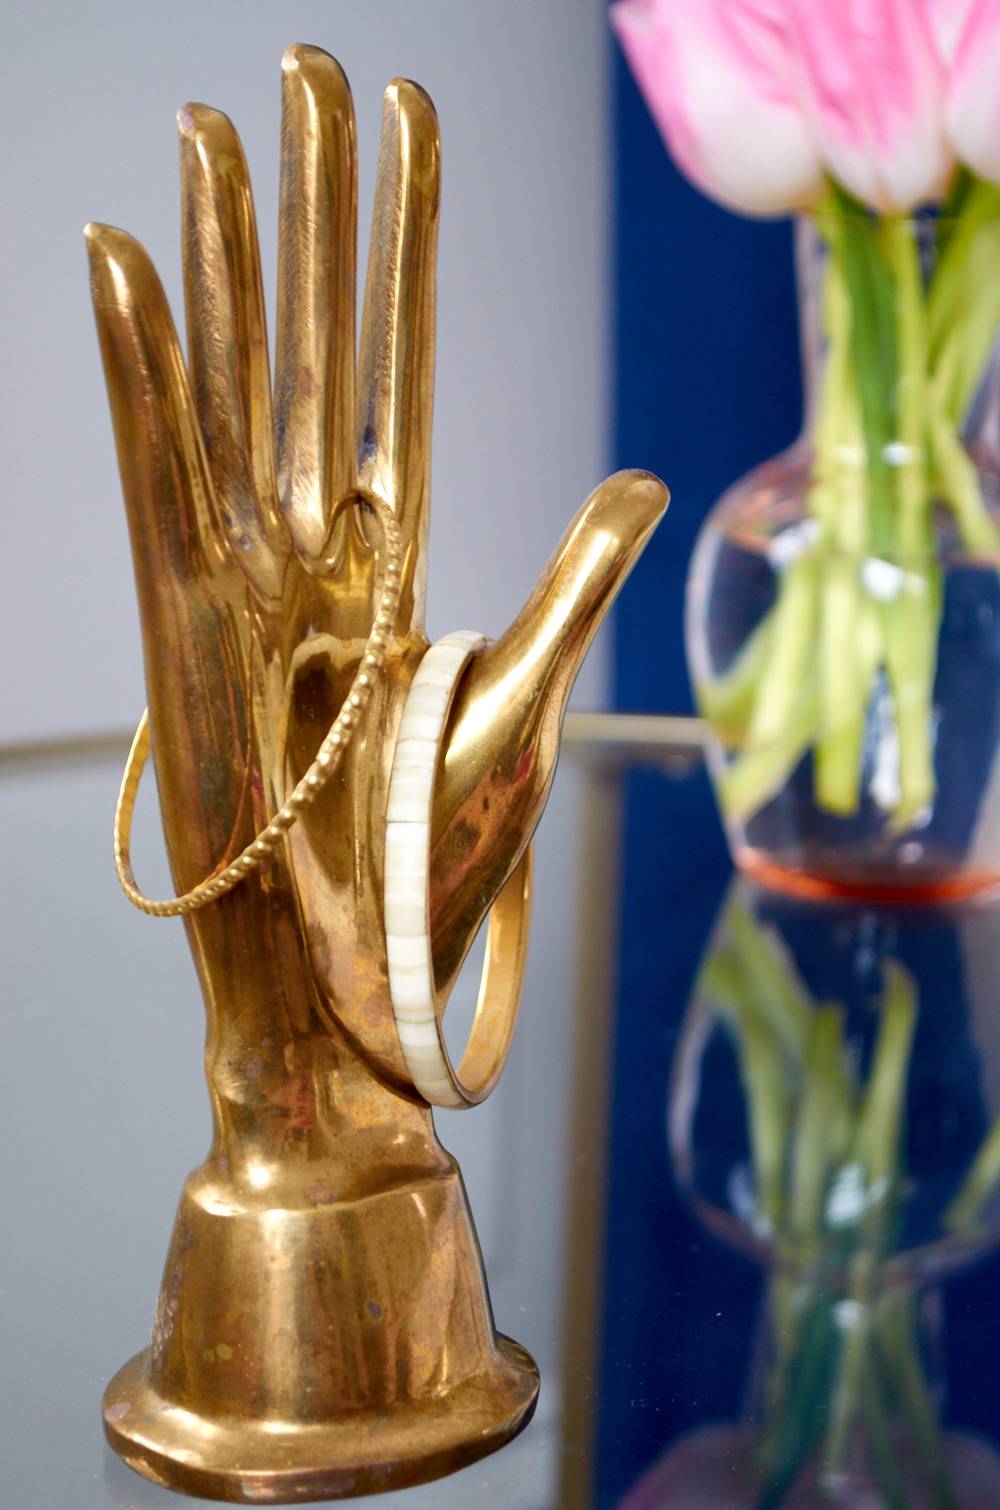 A gold hand statue holds two bracelets.